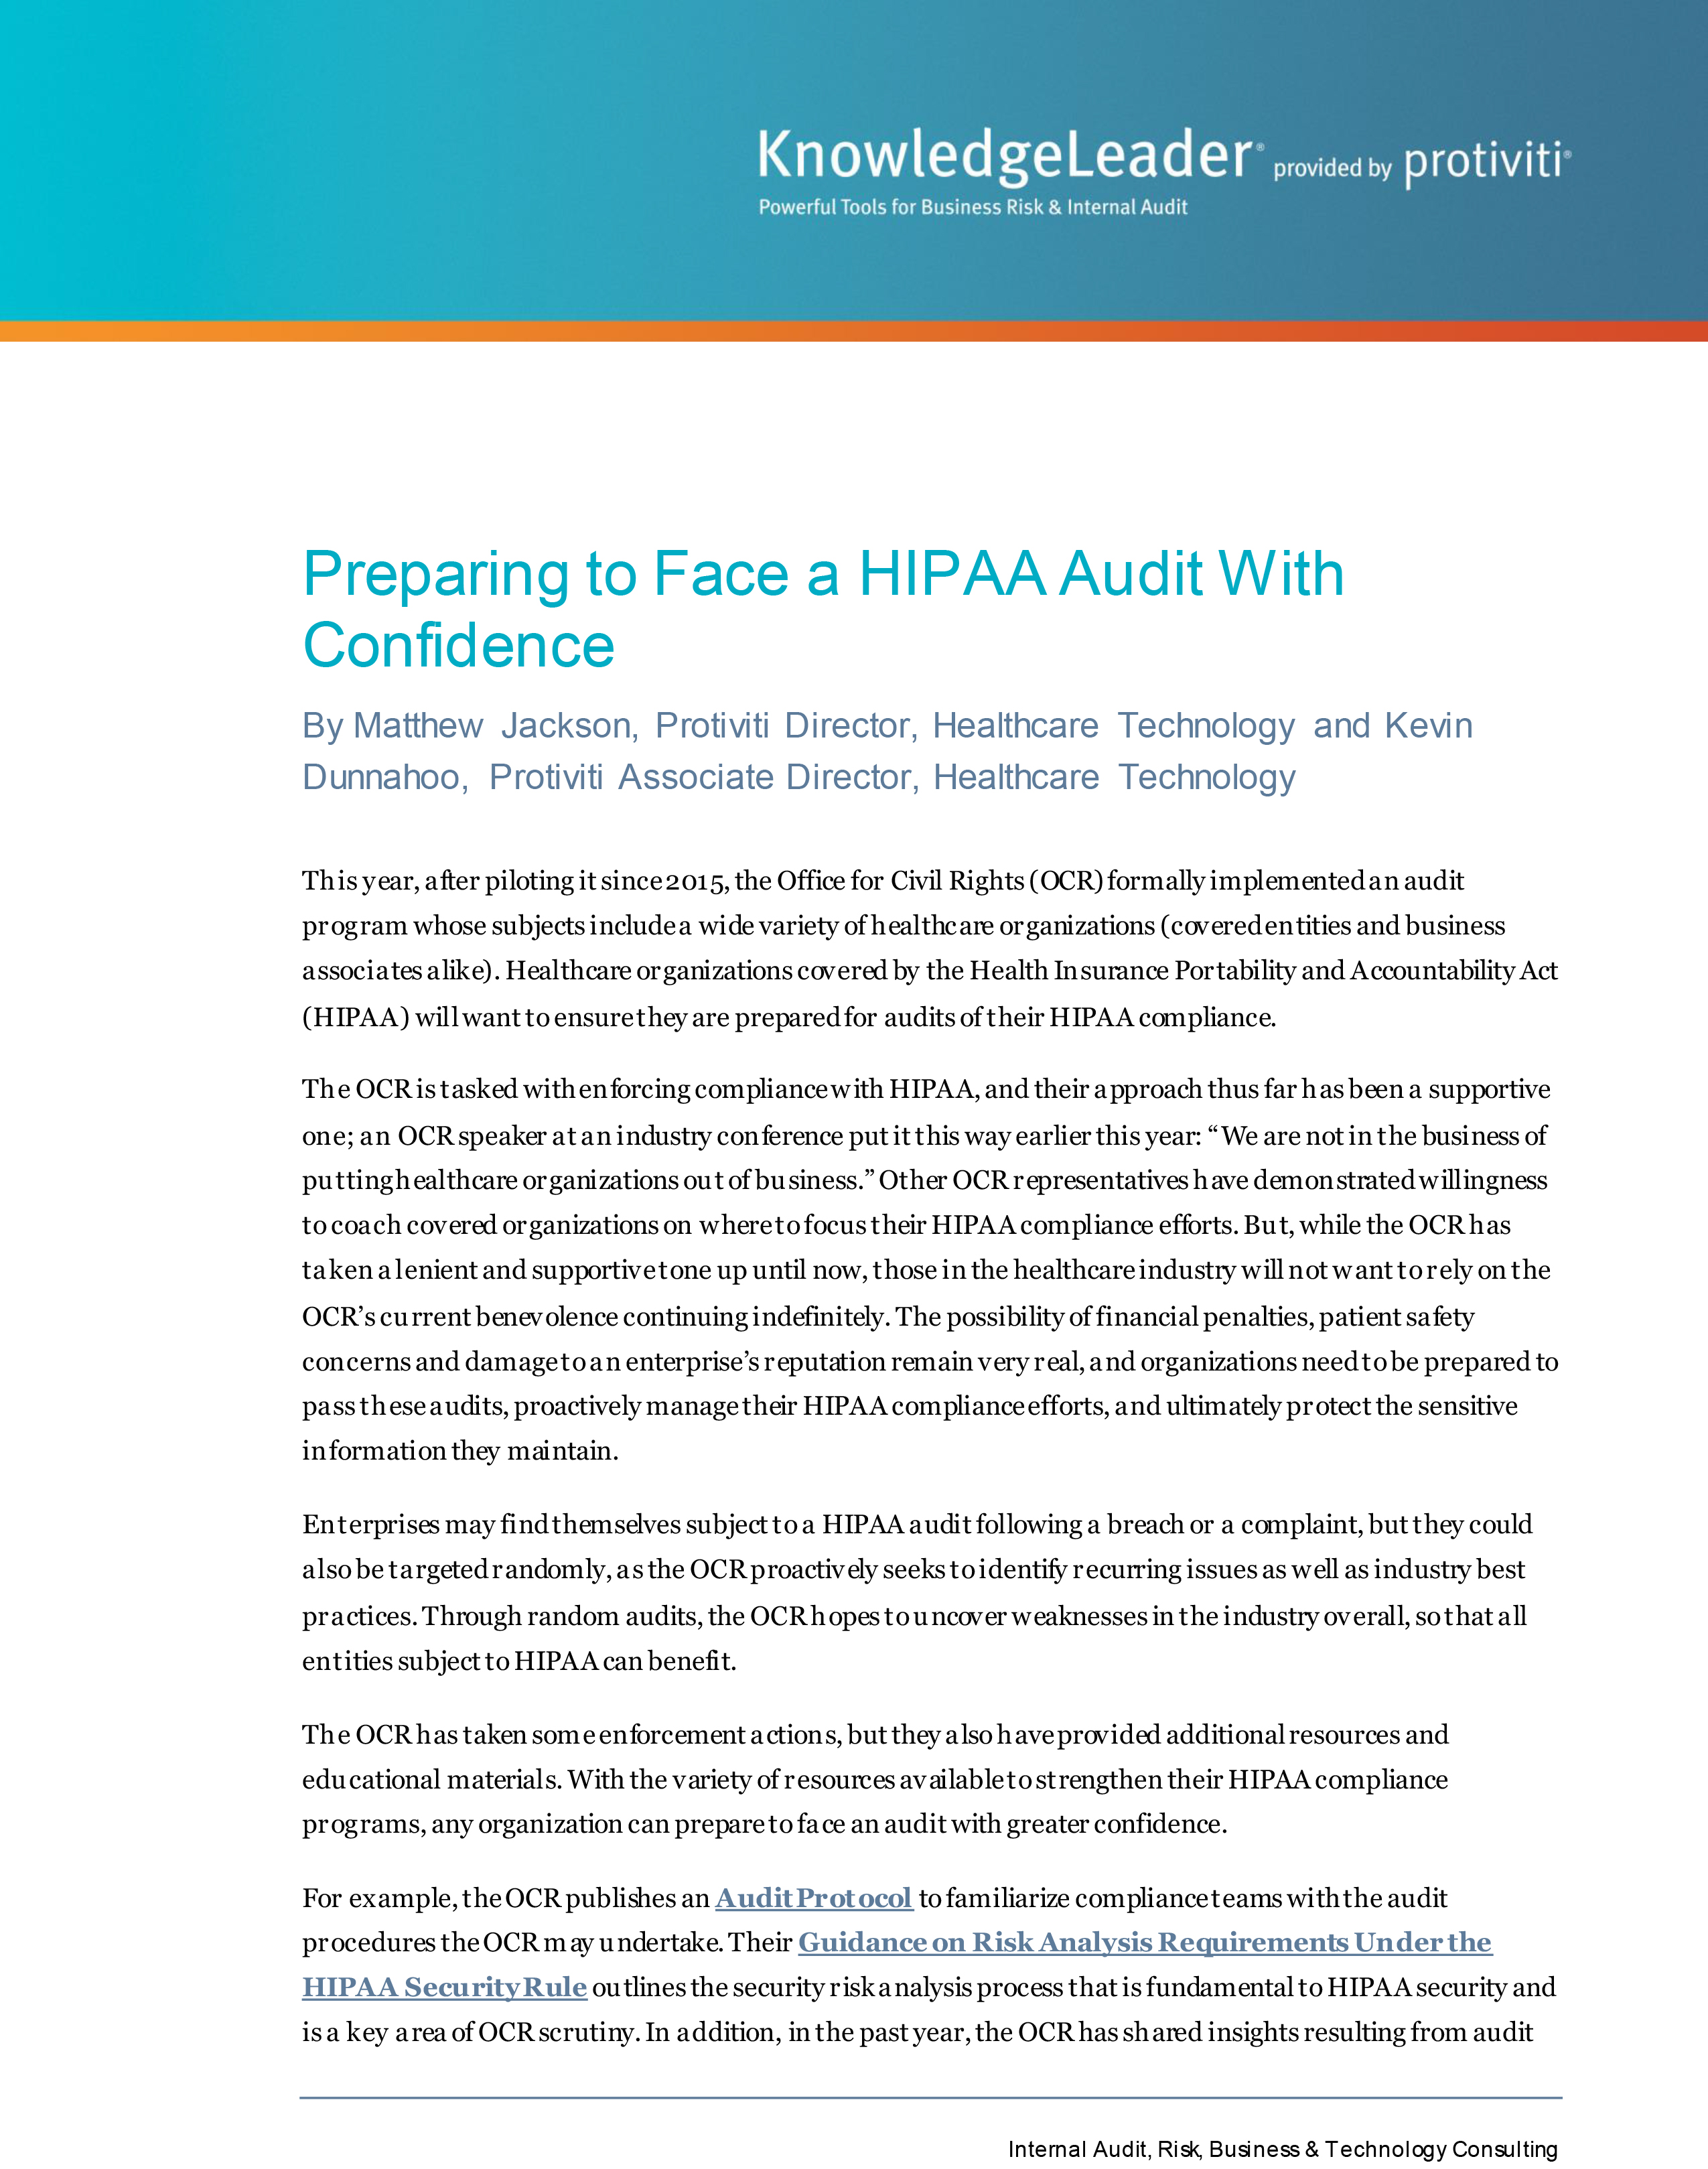 Screenshot of the first page of Preparing to Face a HIPAA Audit With Confidence